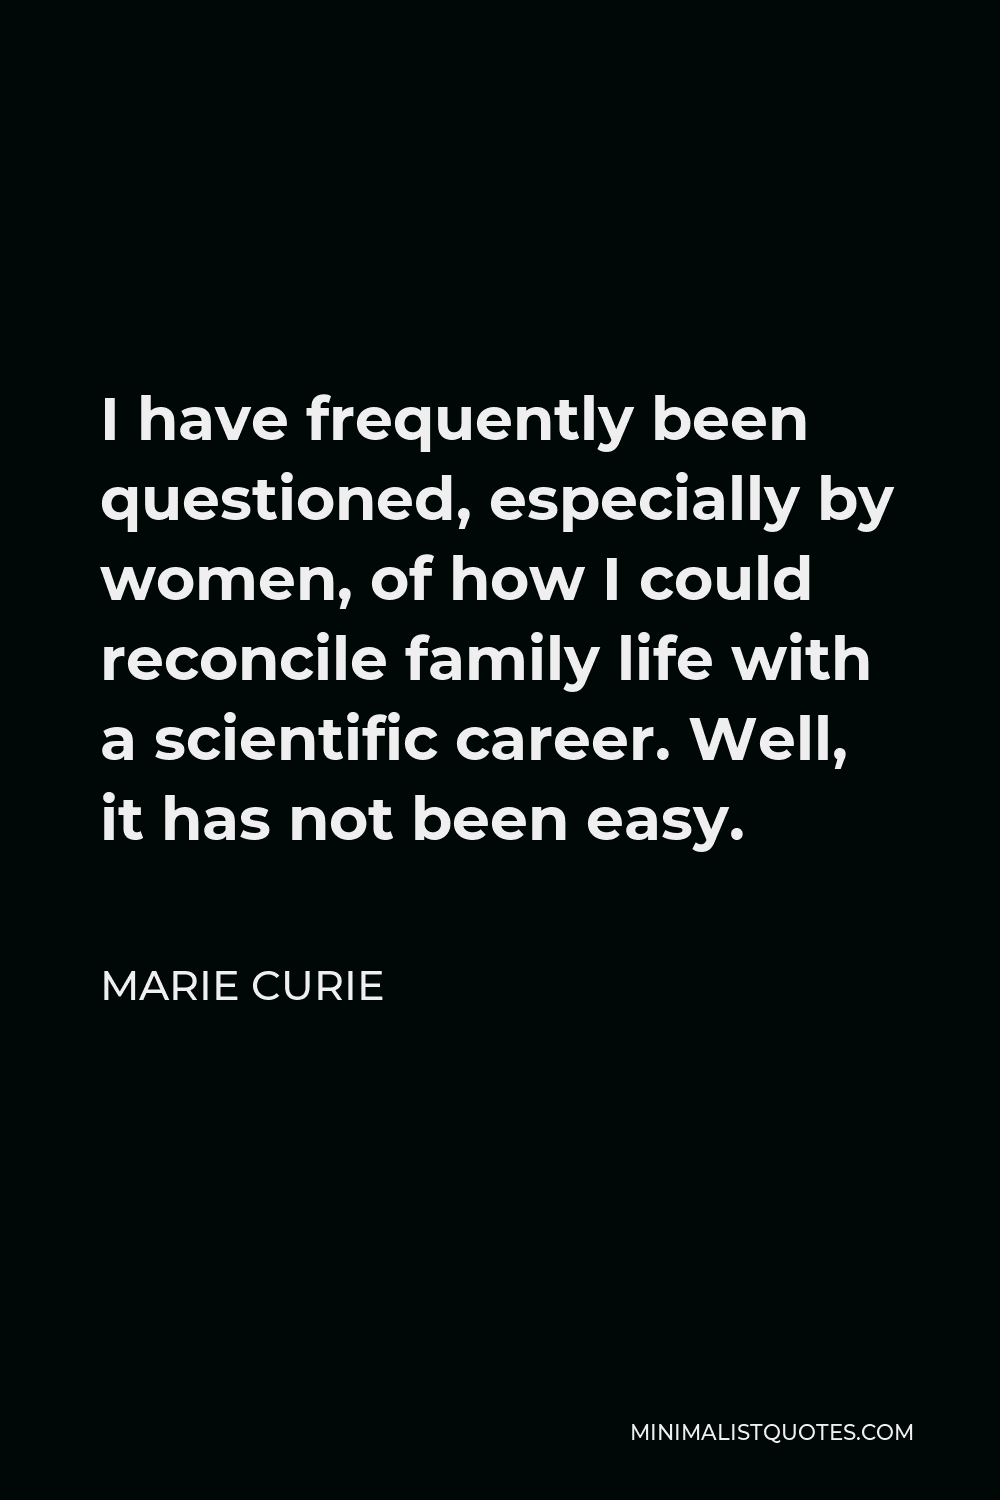 Marie Curie Quote - I have frequently been questioned, especially by women, of how I could reconcile family life with a scientific career. Well, it has not been easy.